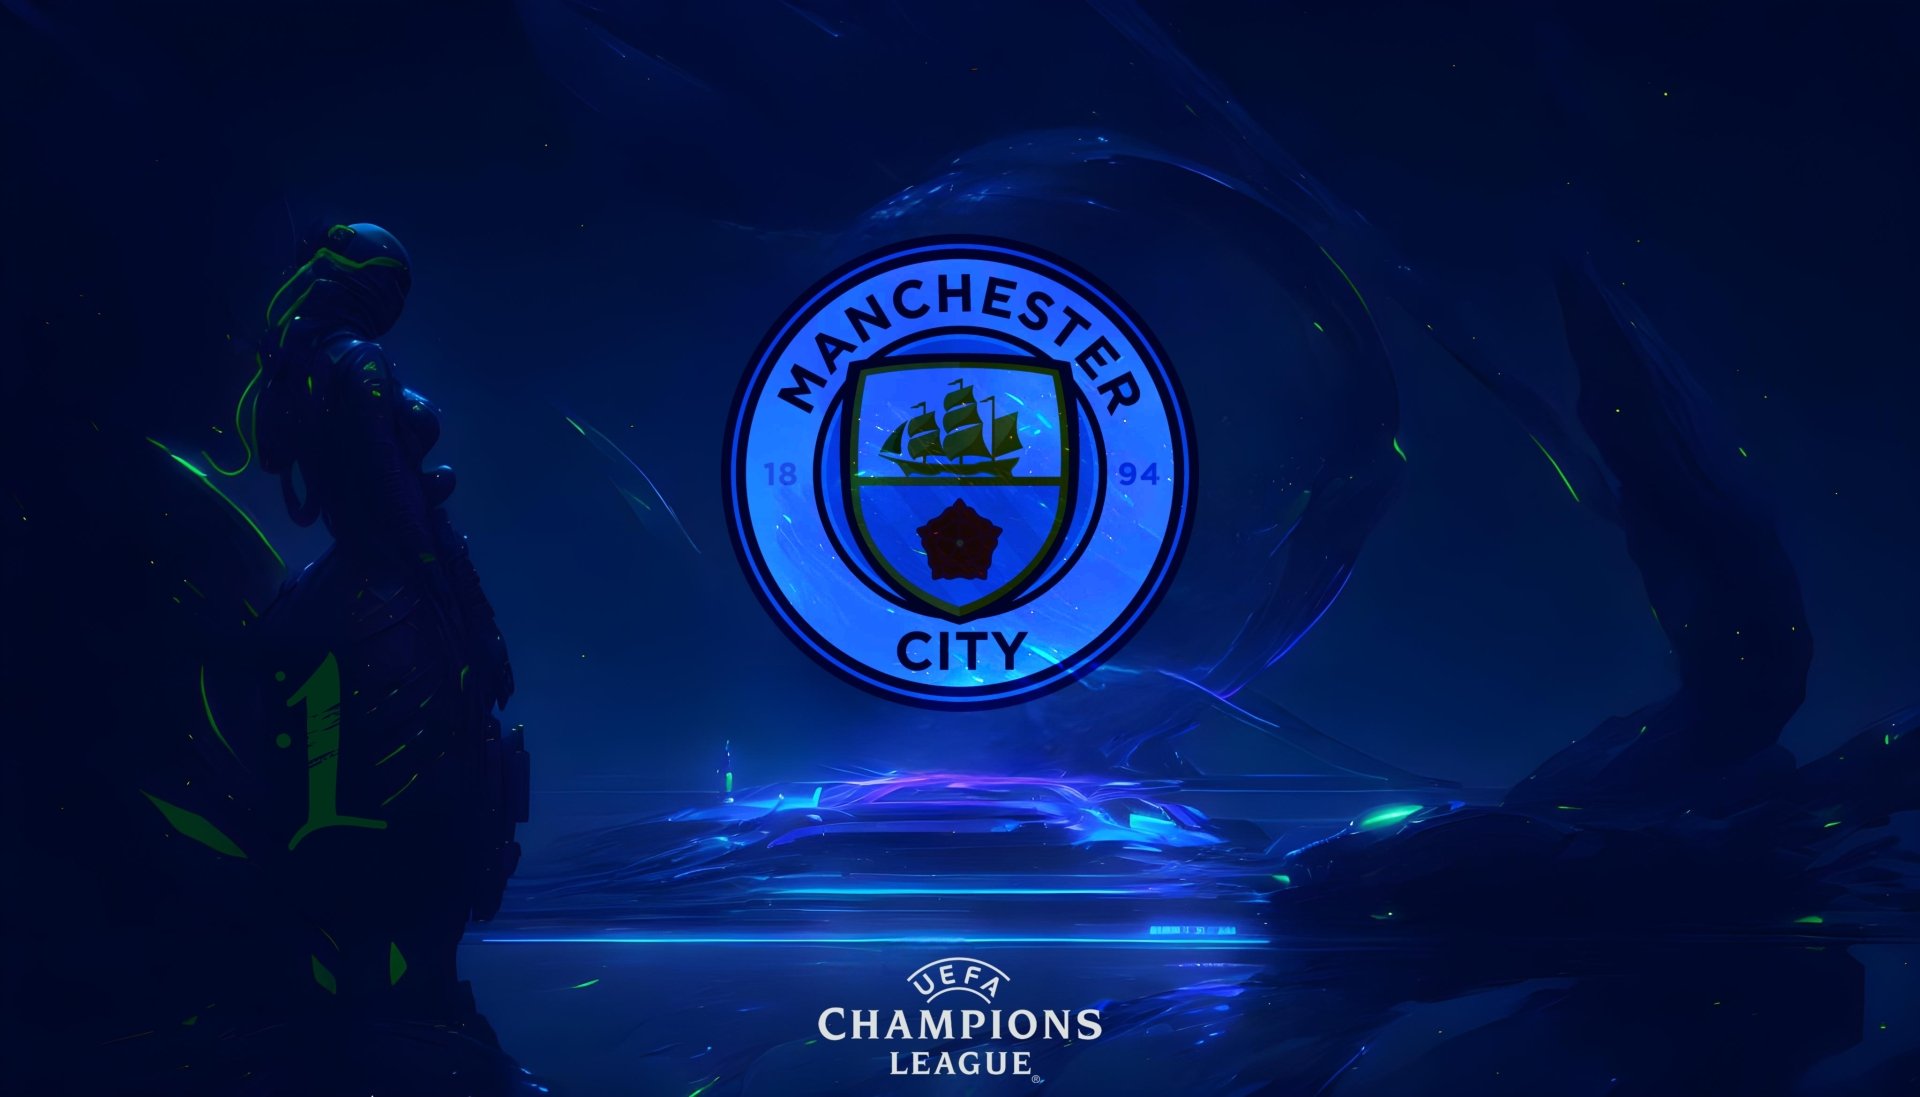 Champions League: Manchester City FC by Z A Y N O S